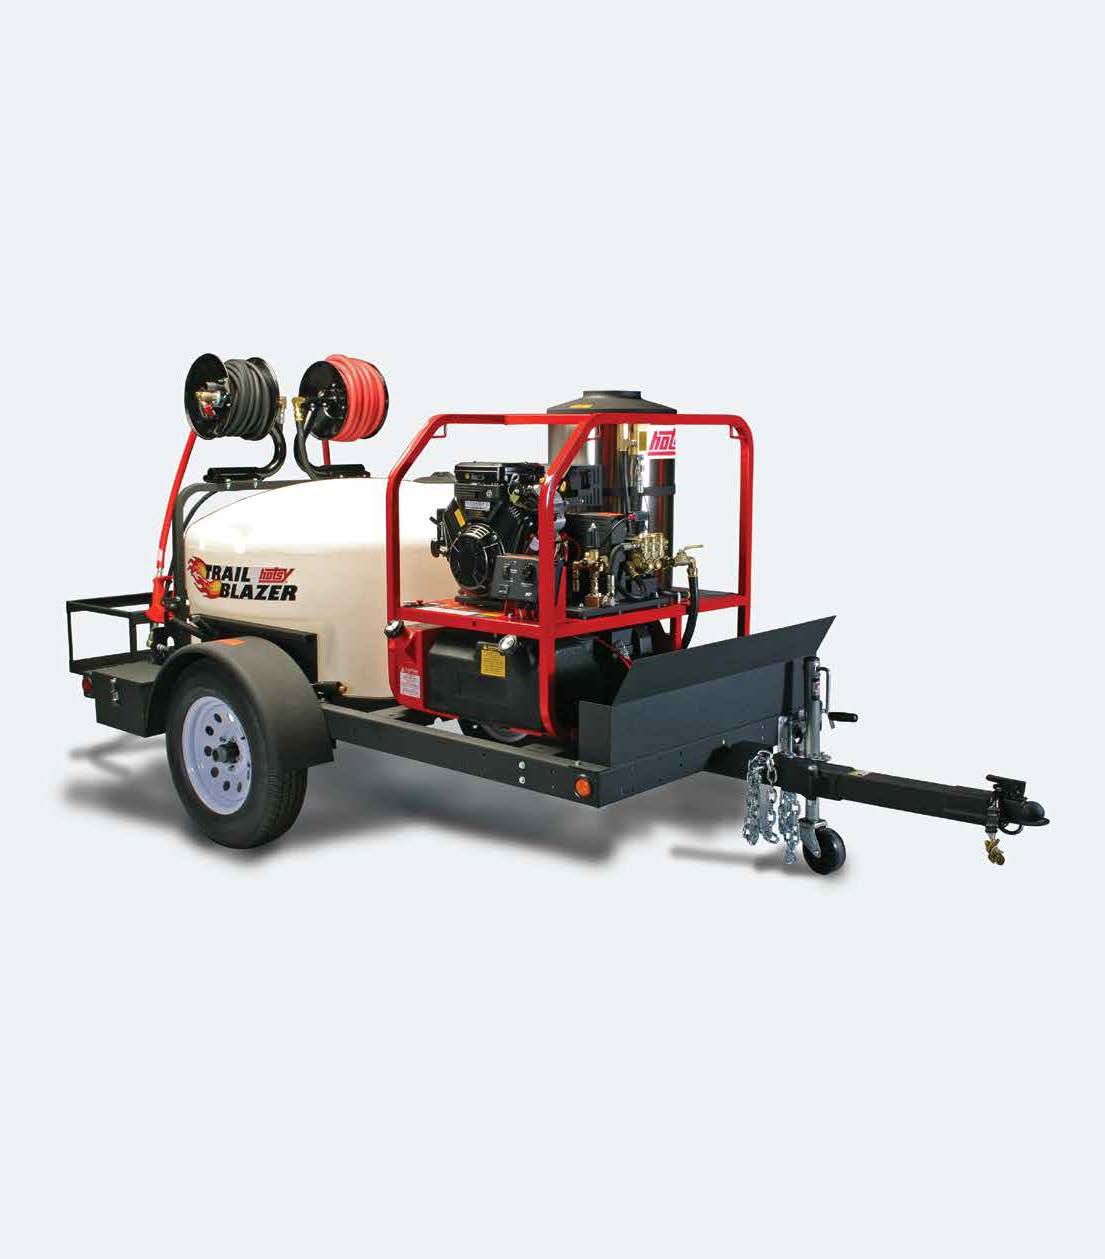 Hotsy TRAIL BLAZER TRB-3500 Trailer System – Electric Mobile Hot Water Pressure Washers